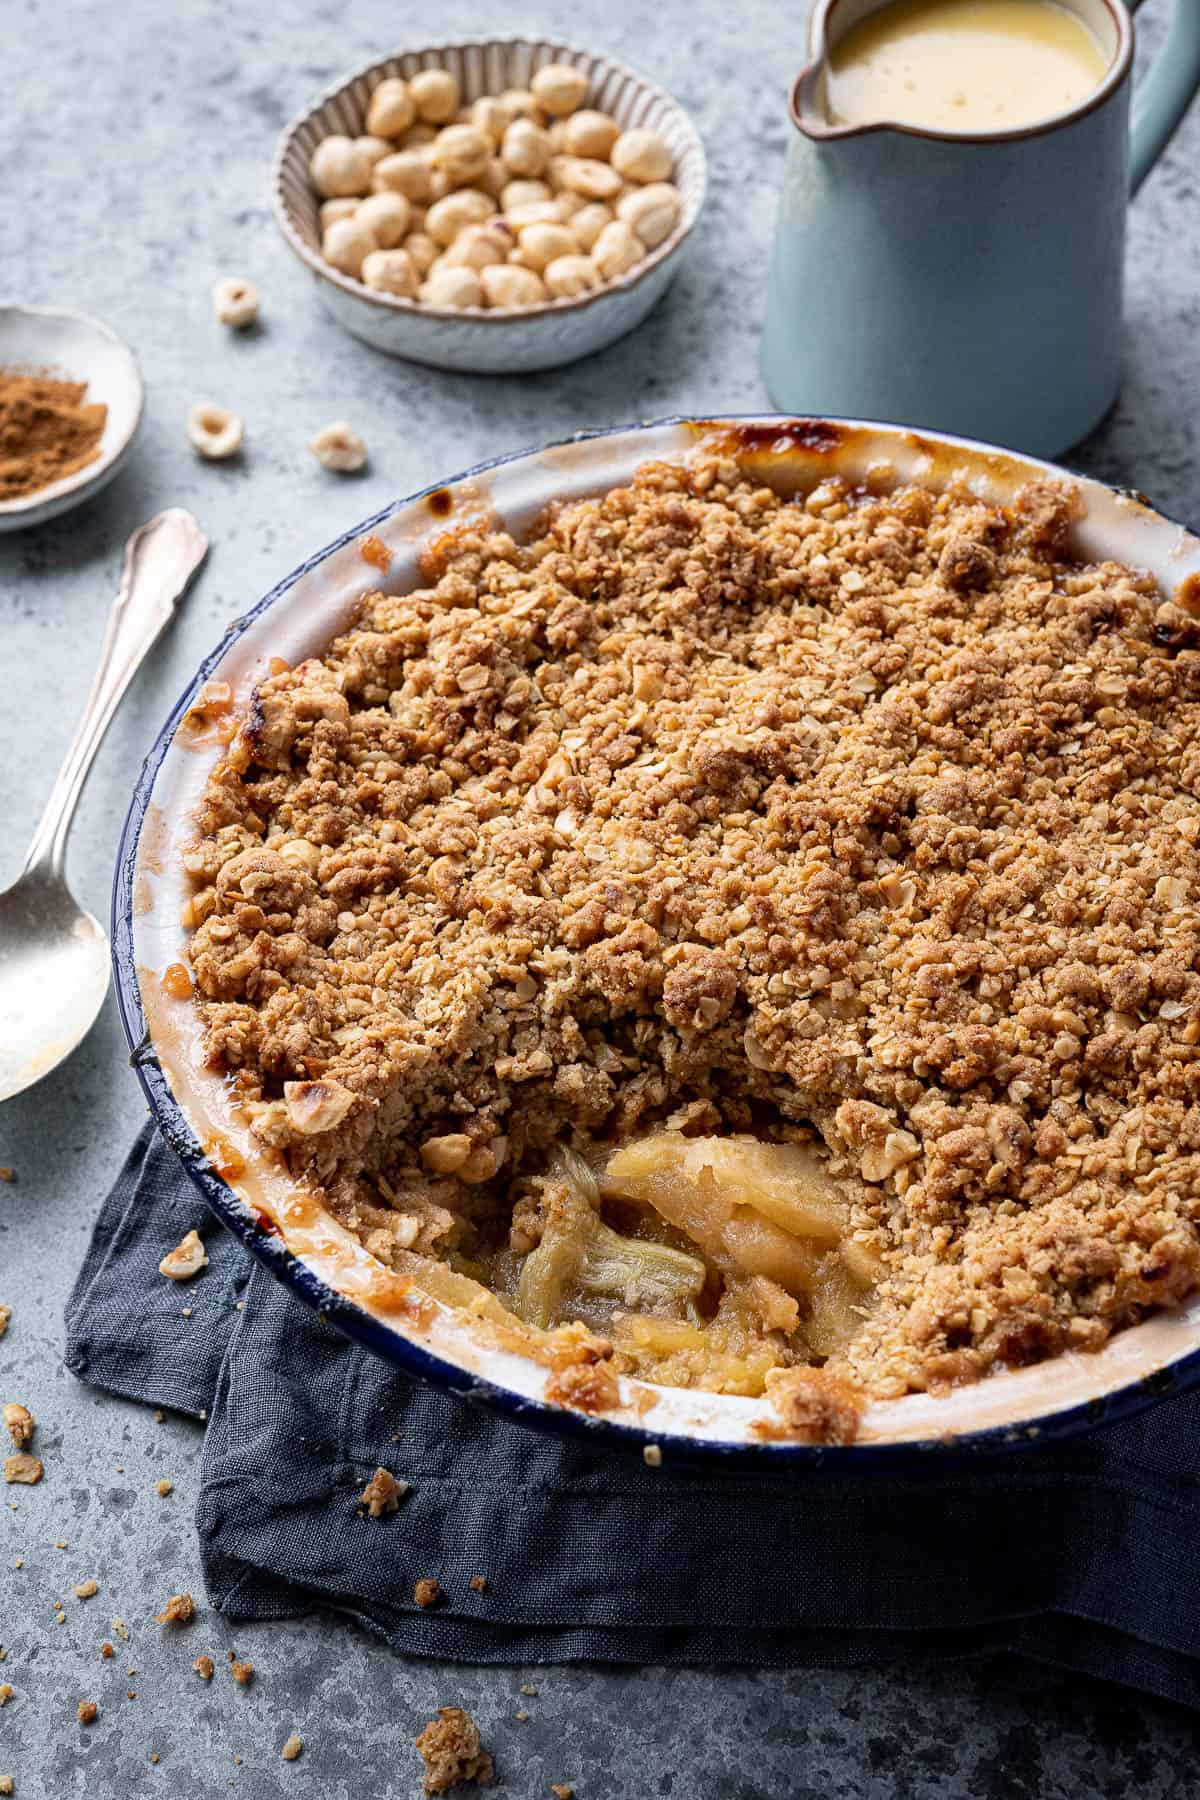 Close up of a dish of rhubarb apple crumble with a jug of custard and bowls of hazelnuts and cinnamon.